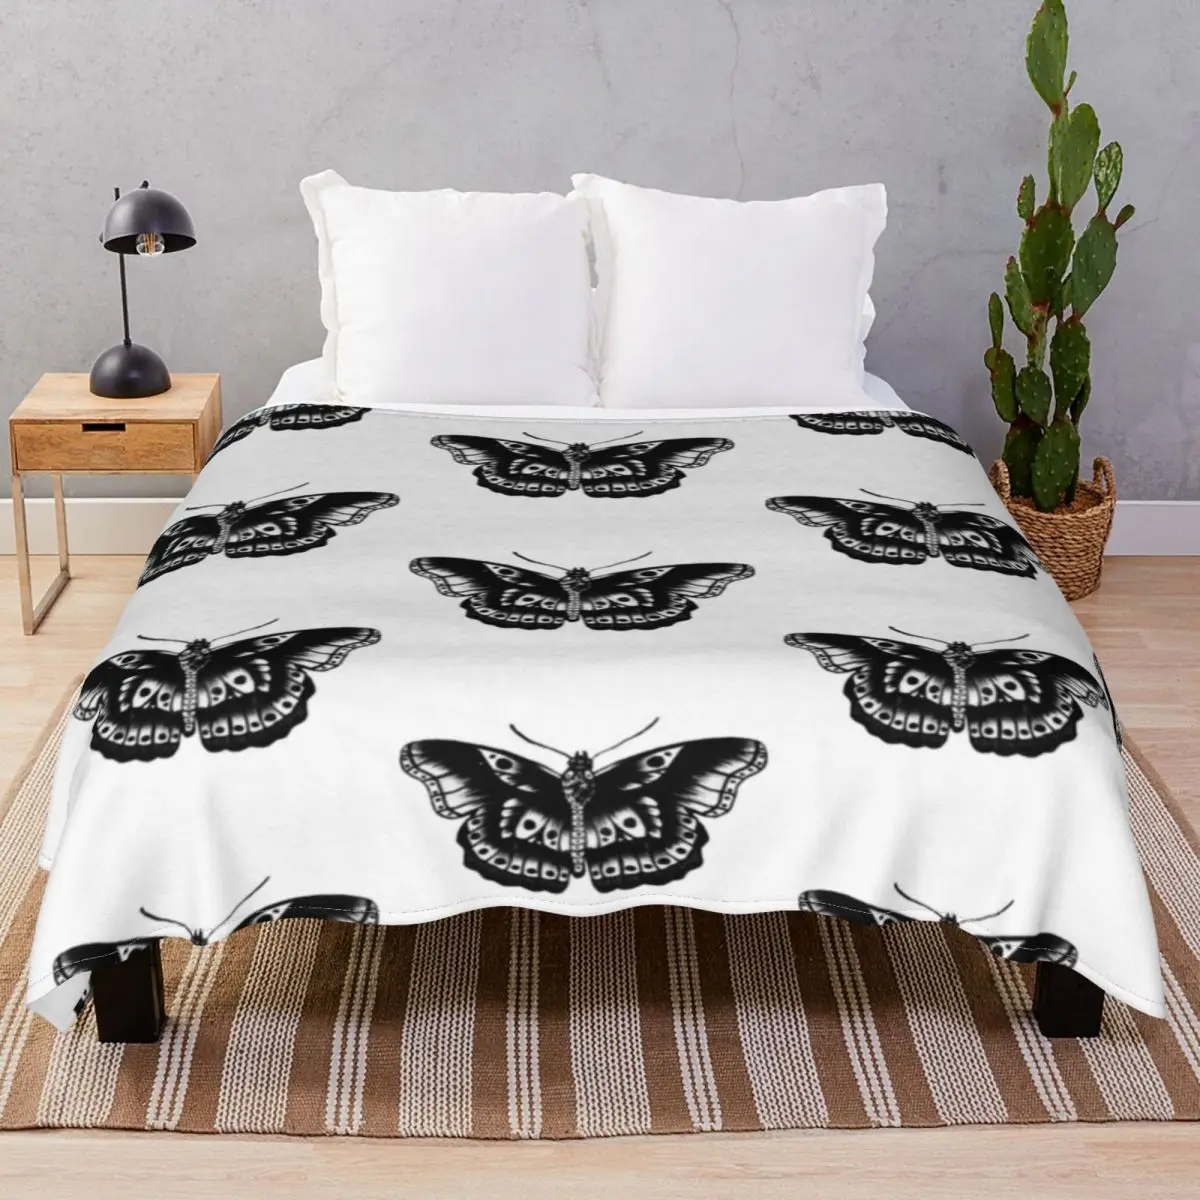 Butterfly Tattoo Blankets Flannel Plush Decoration Fluffy Throw Blanket for Bedding Home Couch Camp Office